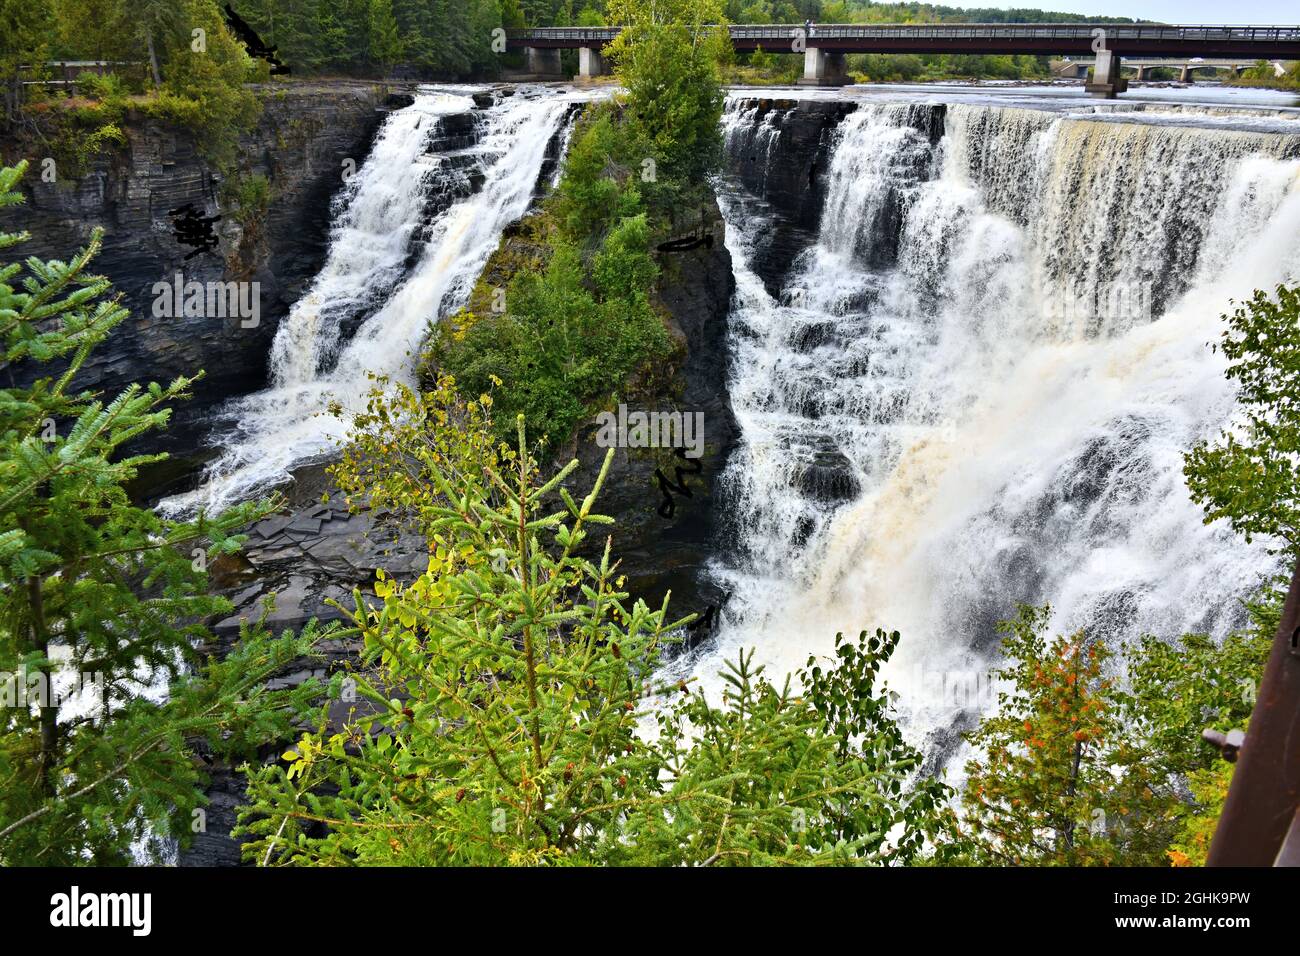 Kakabeka Falls provincial park shows the large waterfall having less water flowing over the falls than usual due to the hot summer and lack of rain. Stock Photo